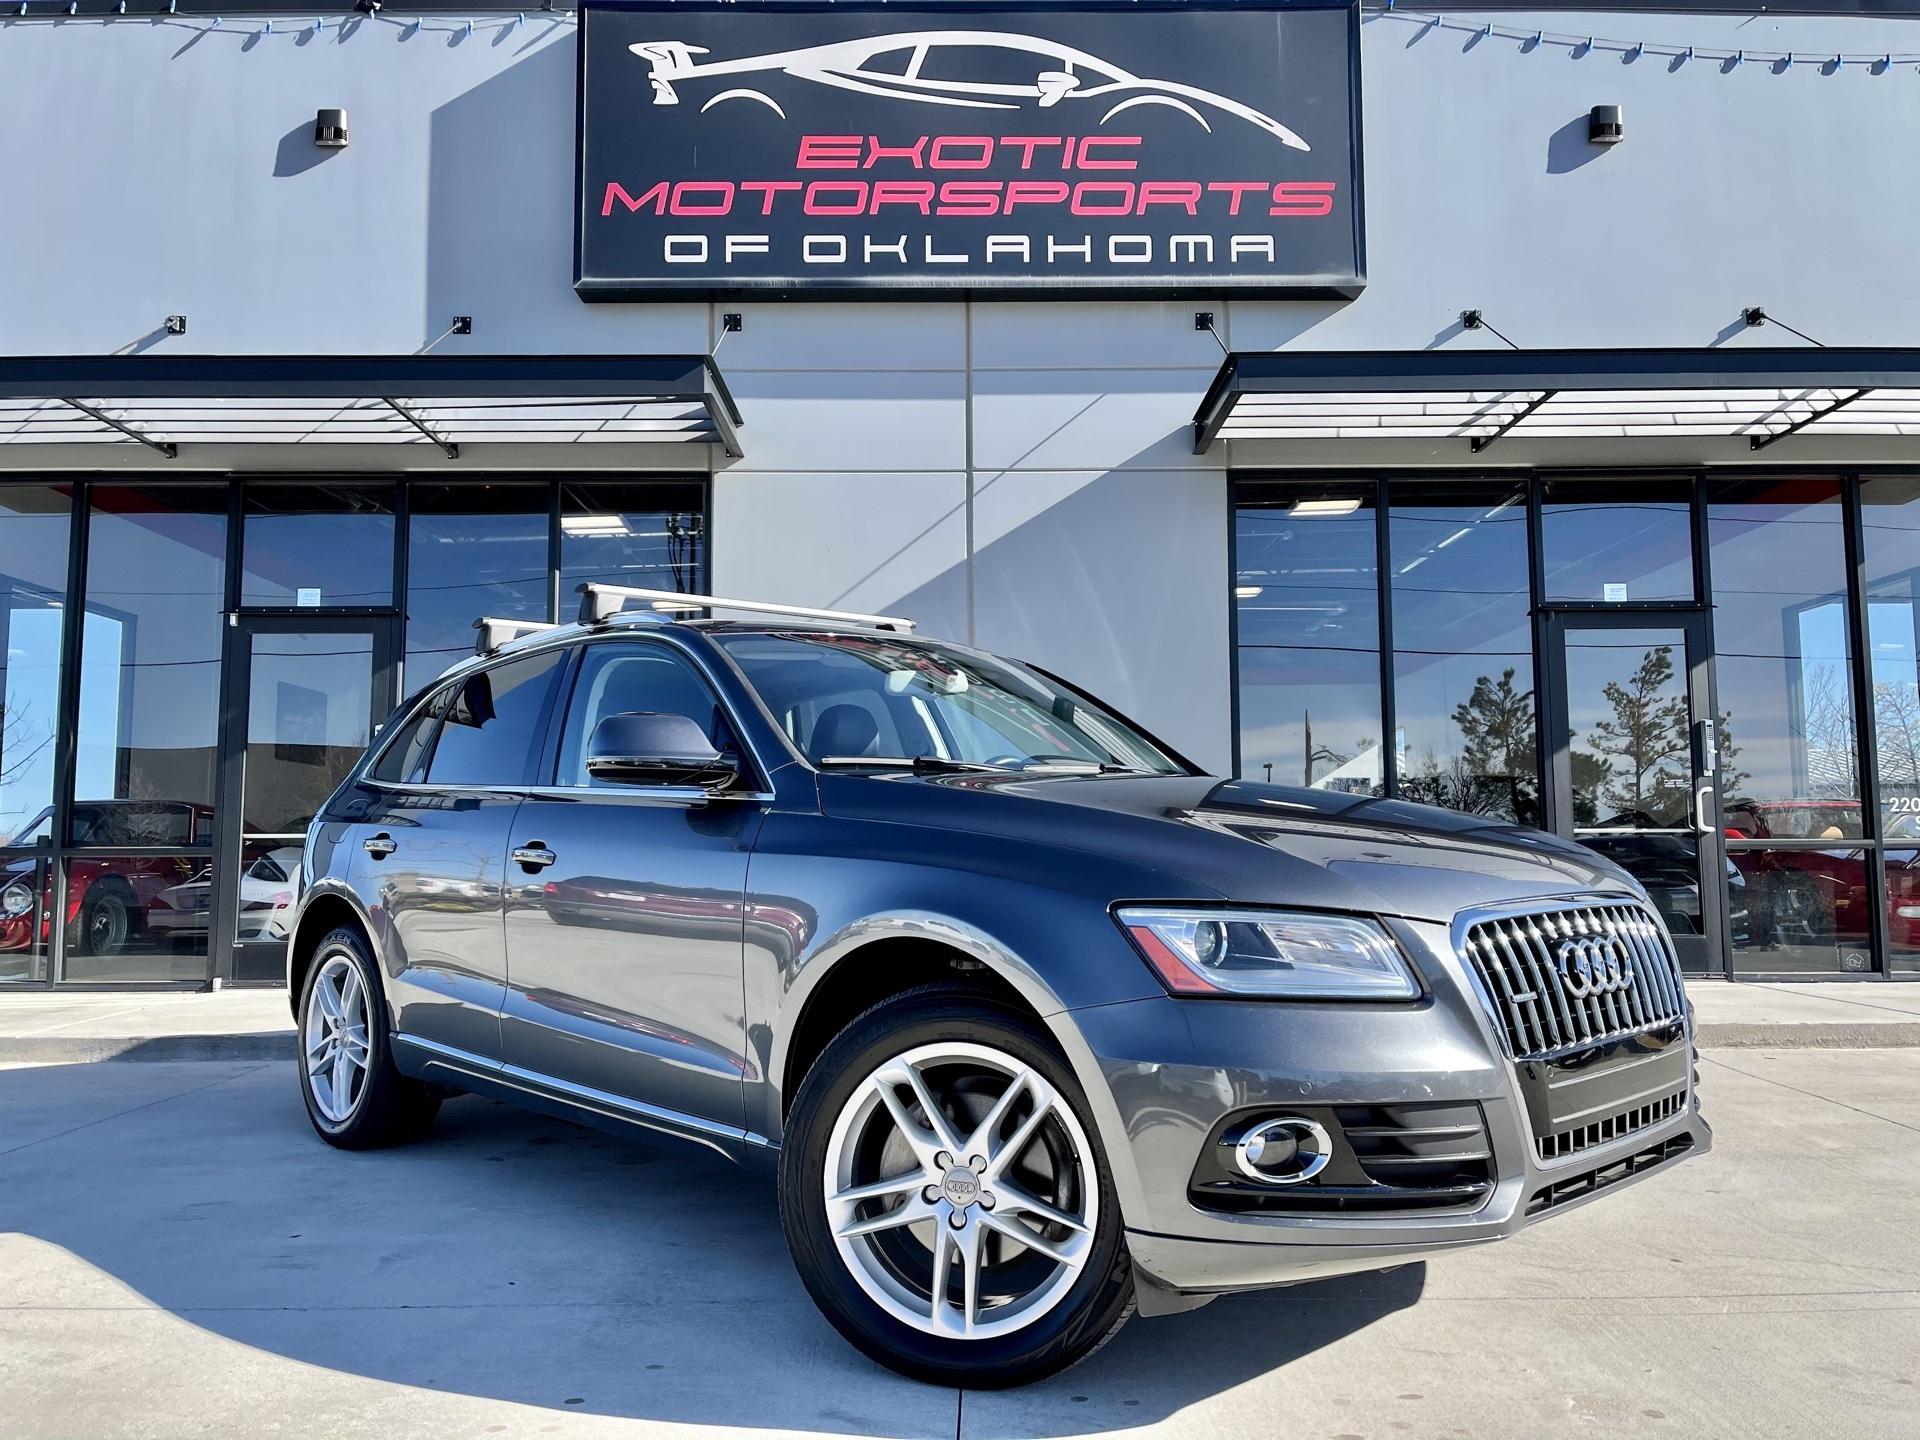 Used 2016 Audi Q5 2 0t Premium Plus For Sale Sold Exotic Motorsports Of Oklahoma Stock A9